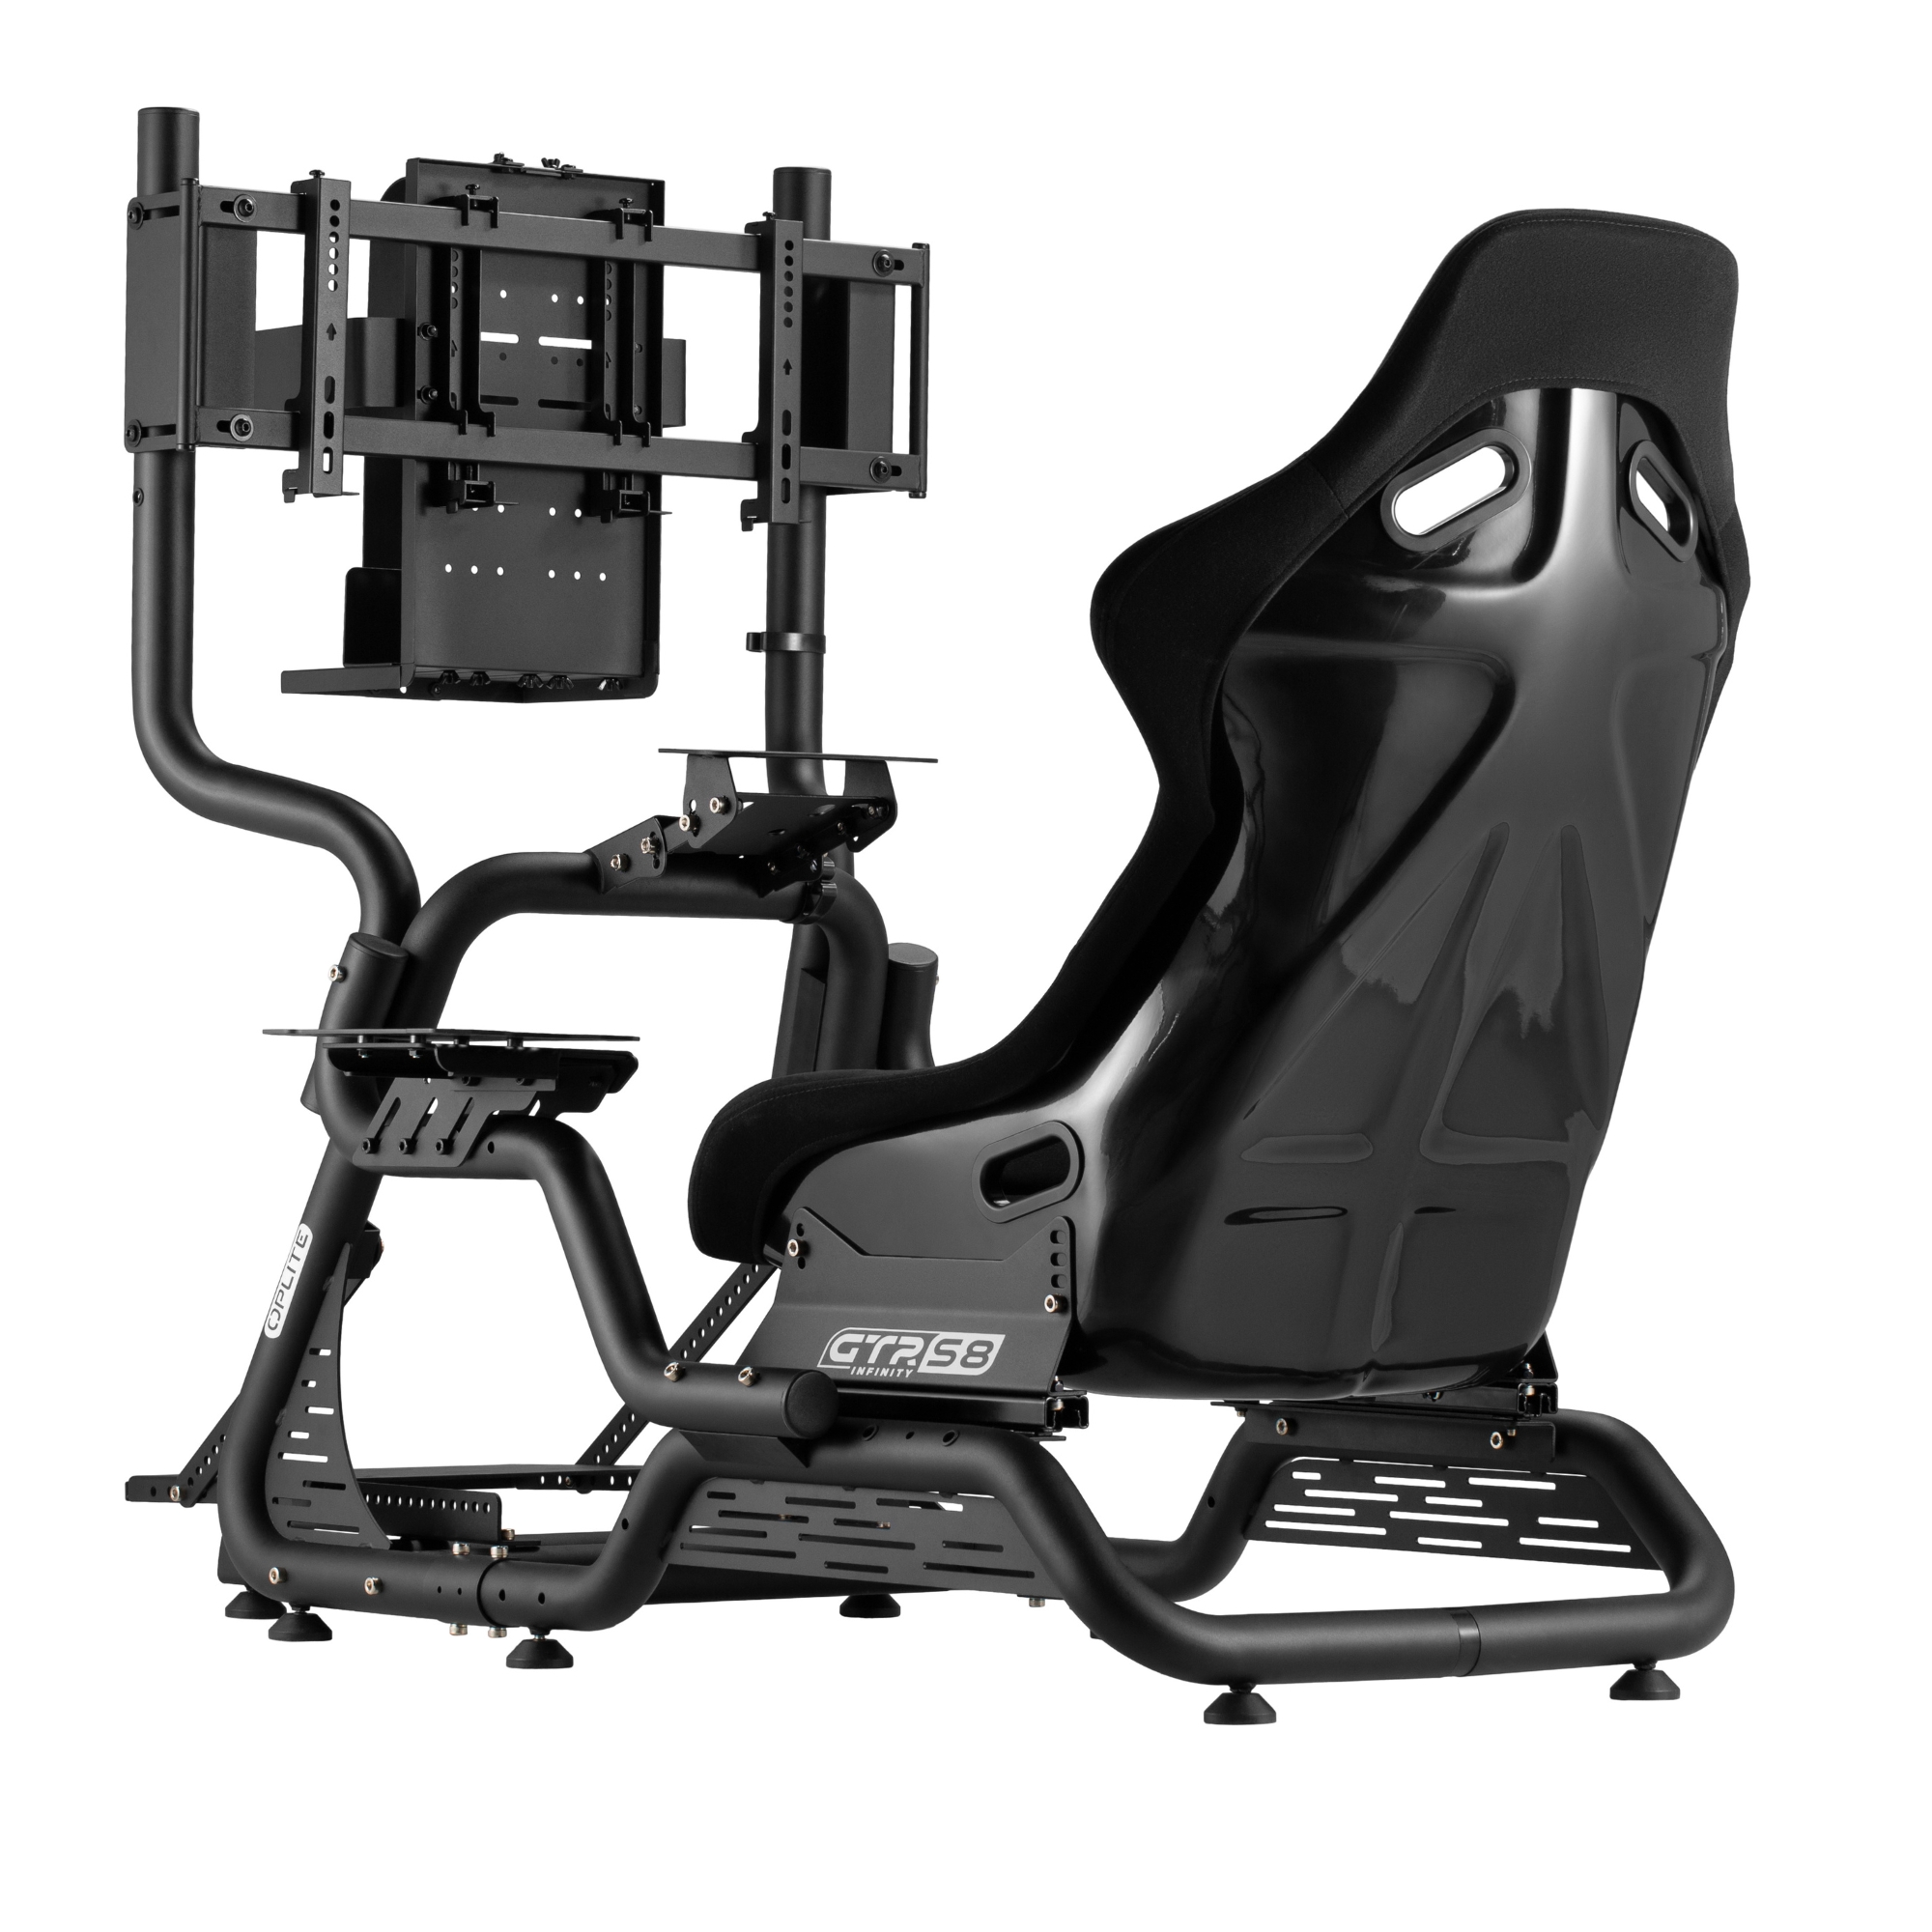 Buy Gaming furniture accessories for GTR S8 Infinity Cockpit - digitec